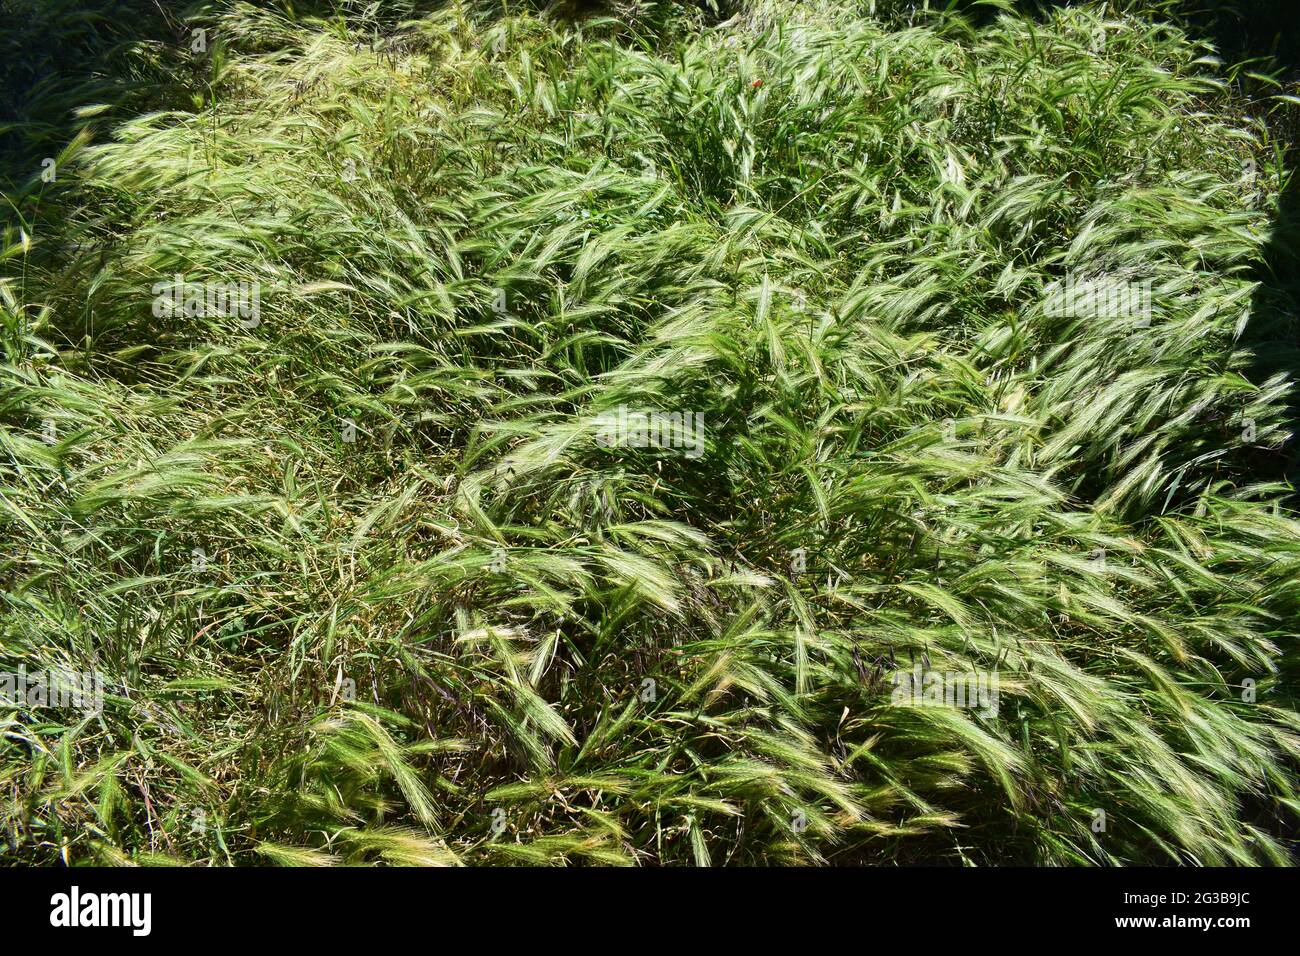 green wheat grass as ecoration plant Stock Photo